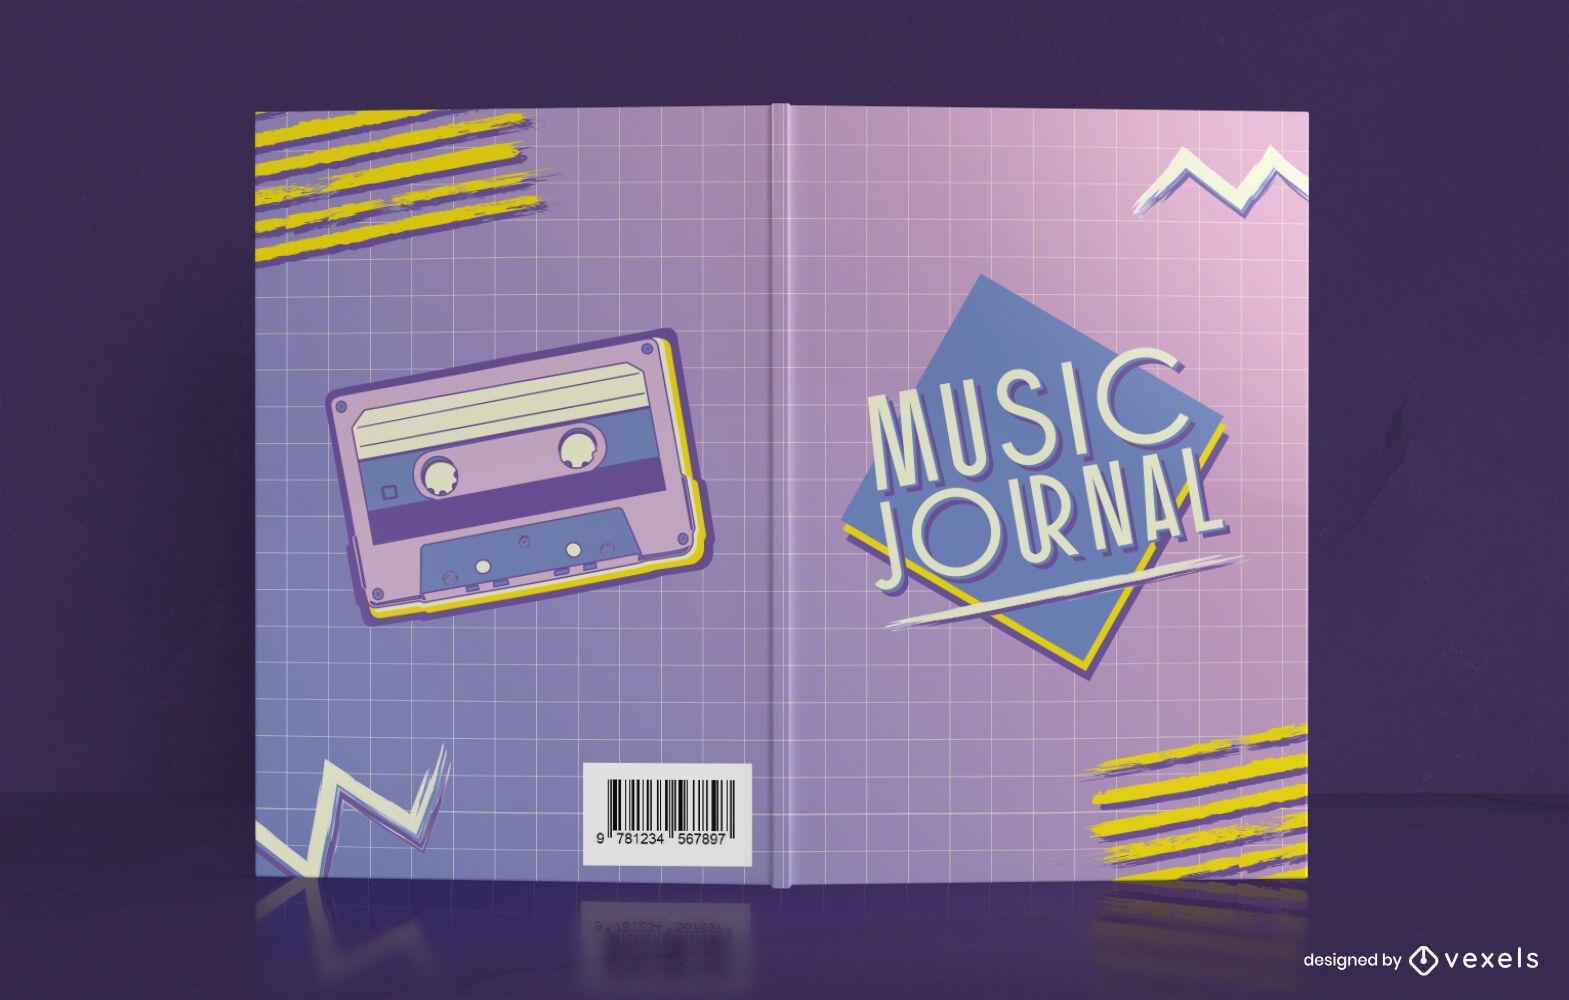 90s Music Journal Book Cover Design